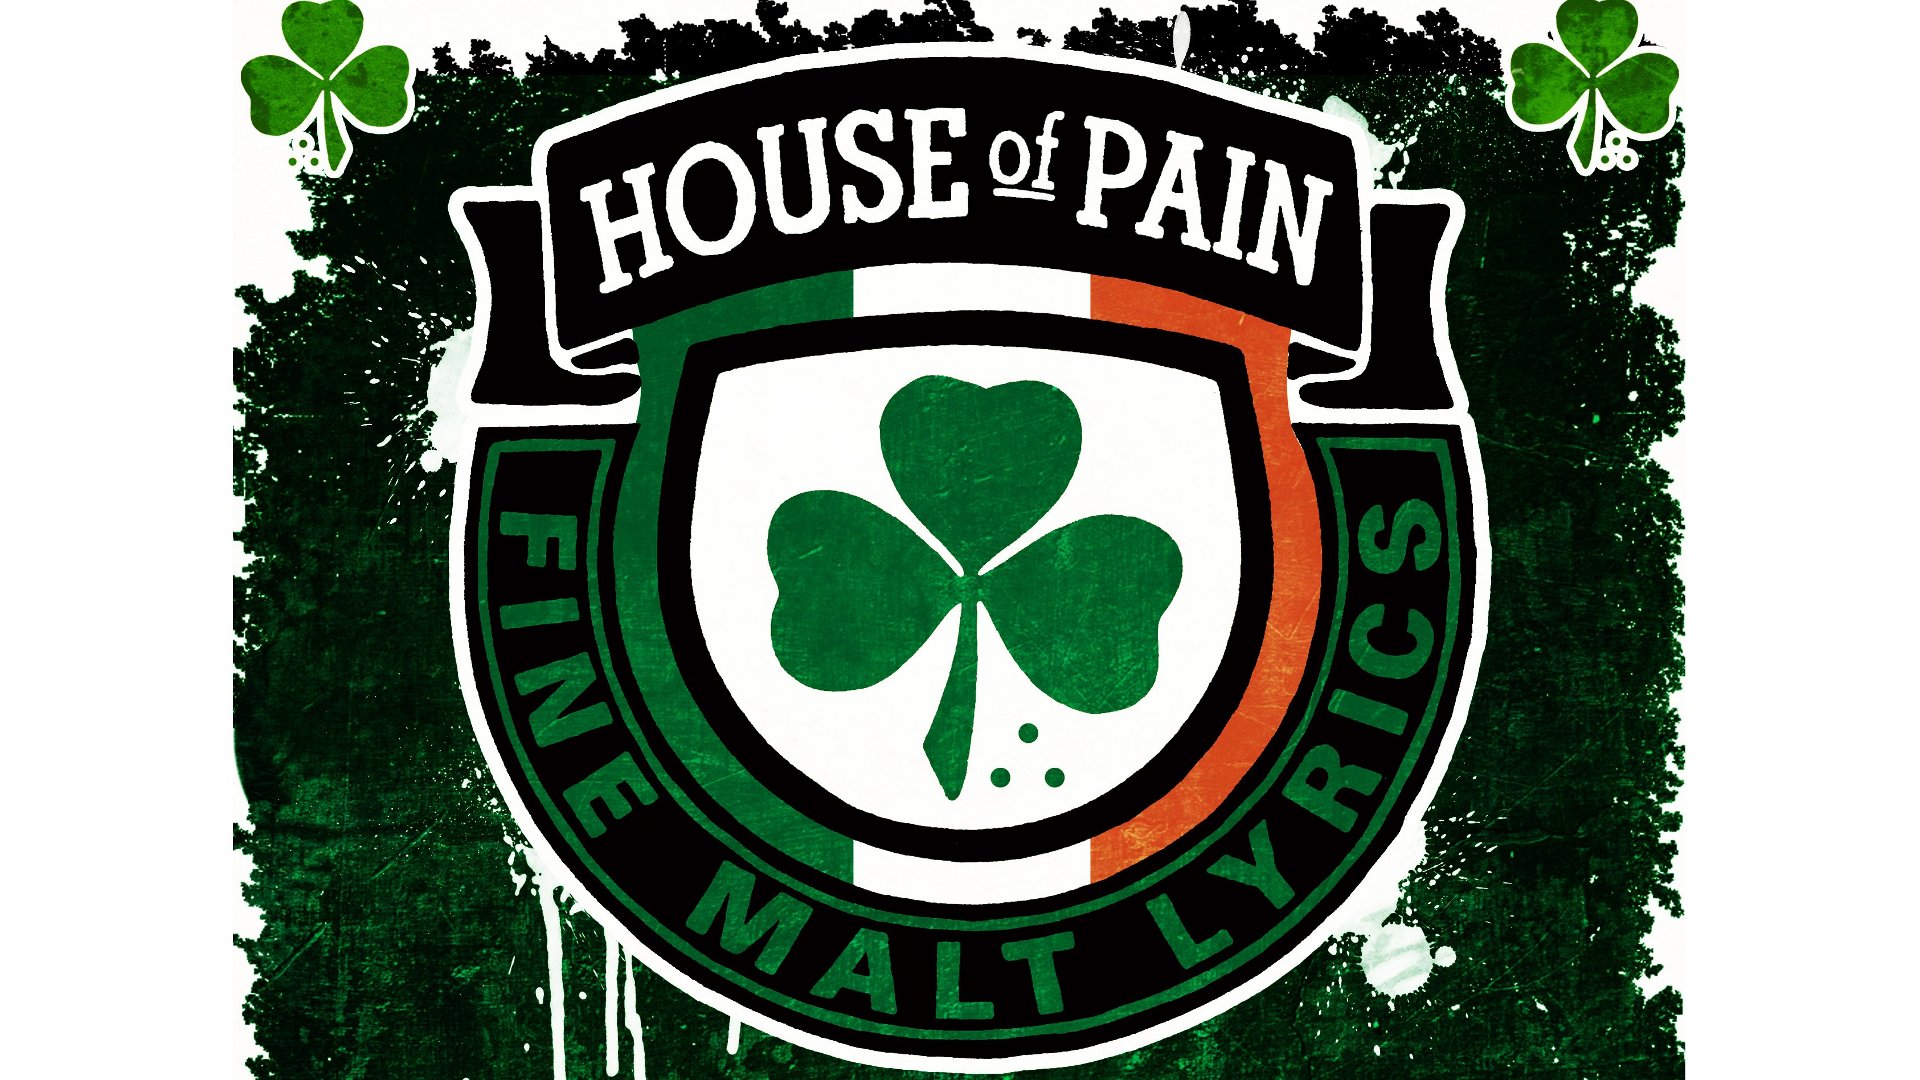  house of pain the house of pain hip hop rap rock and indie 1920x1080